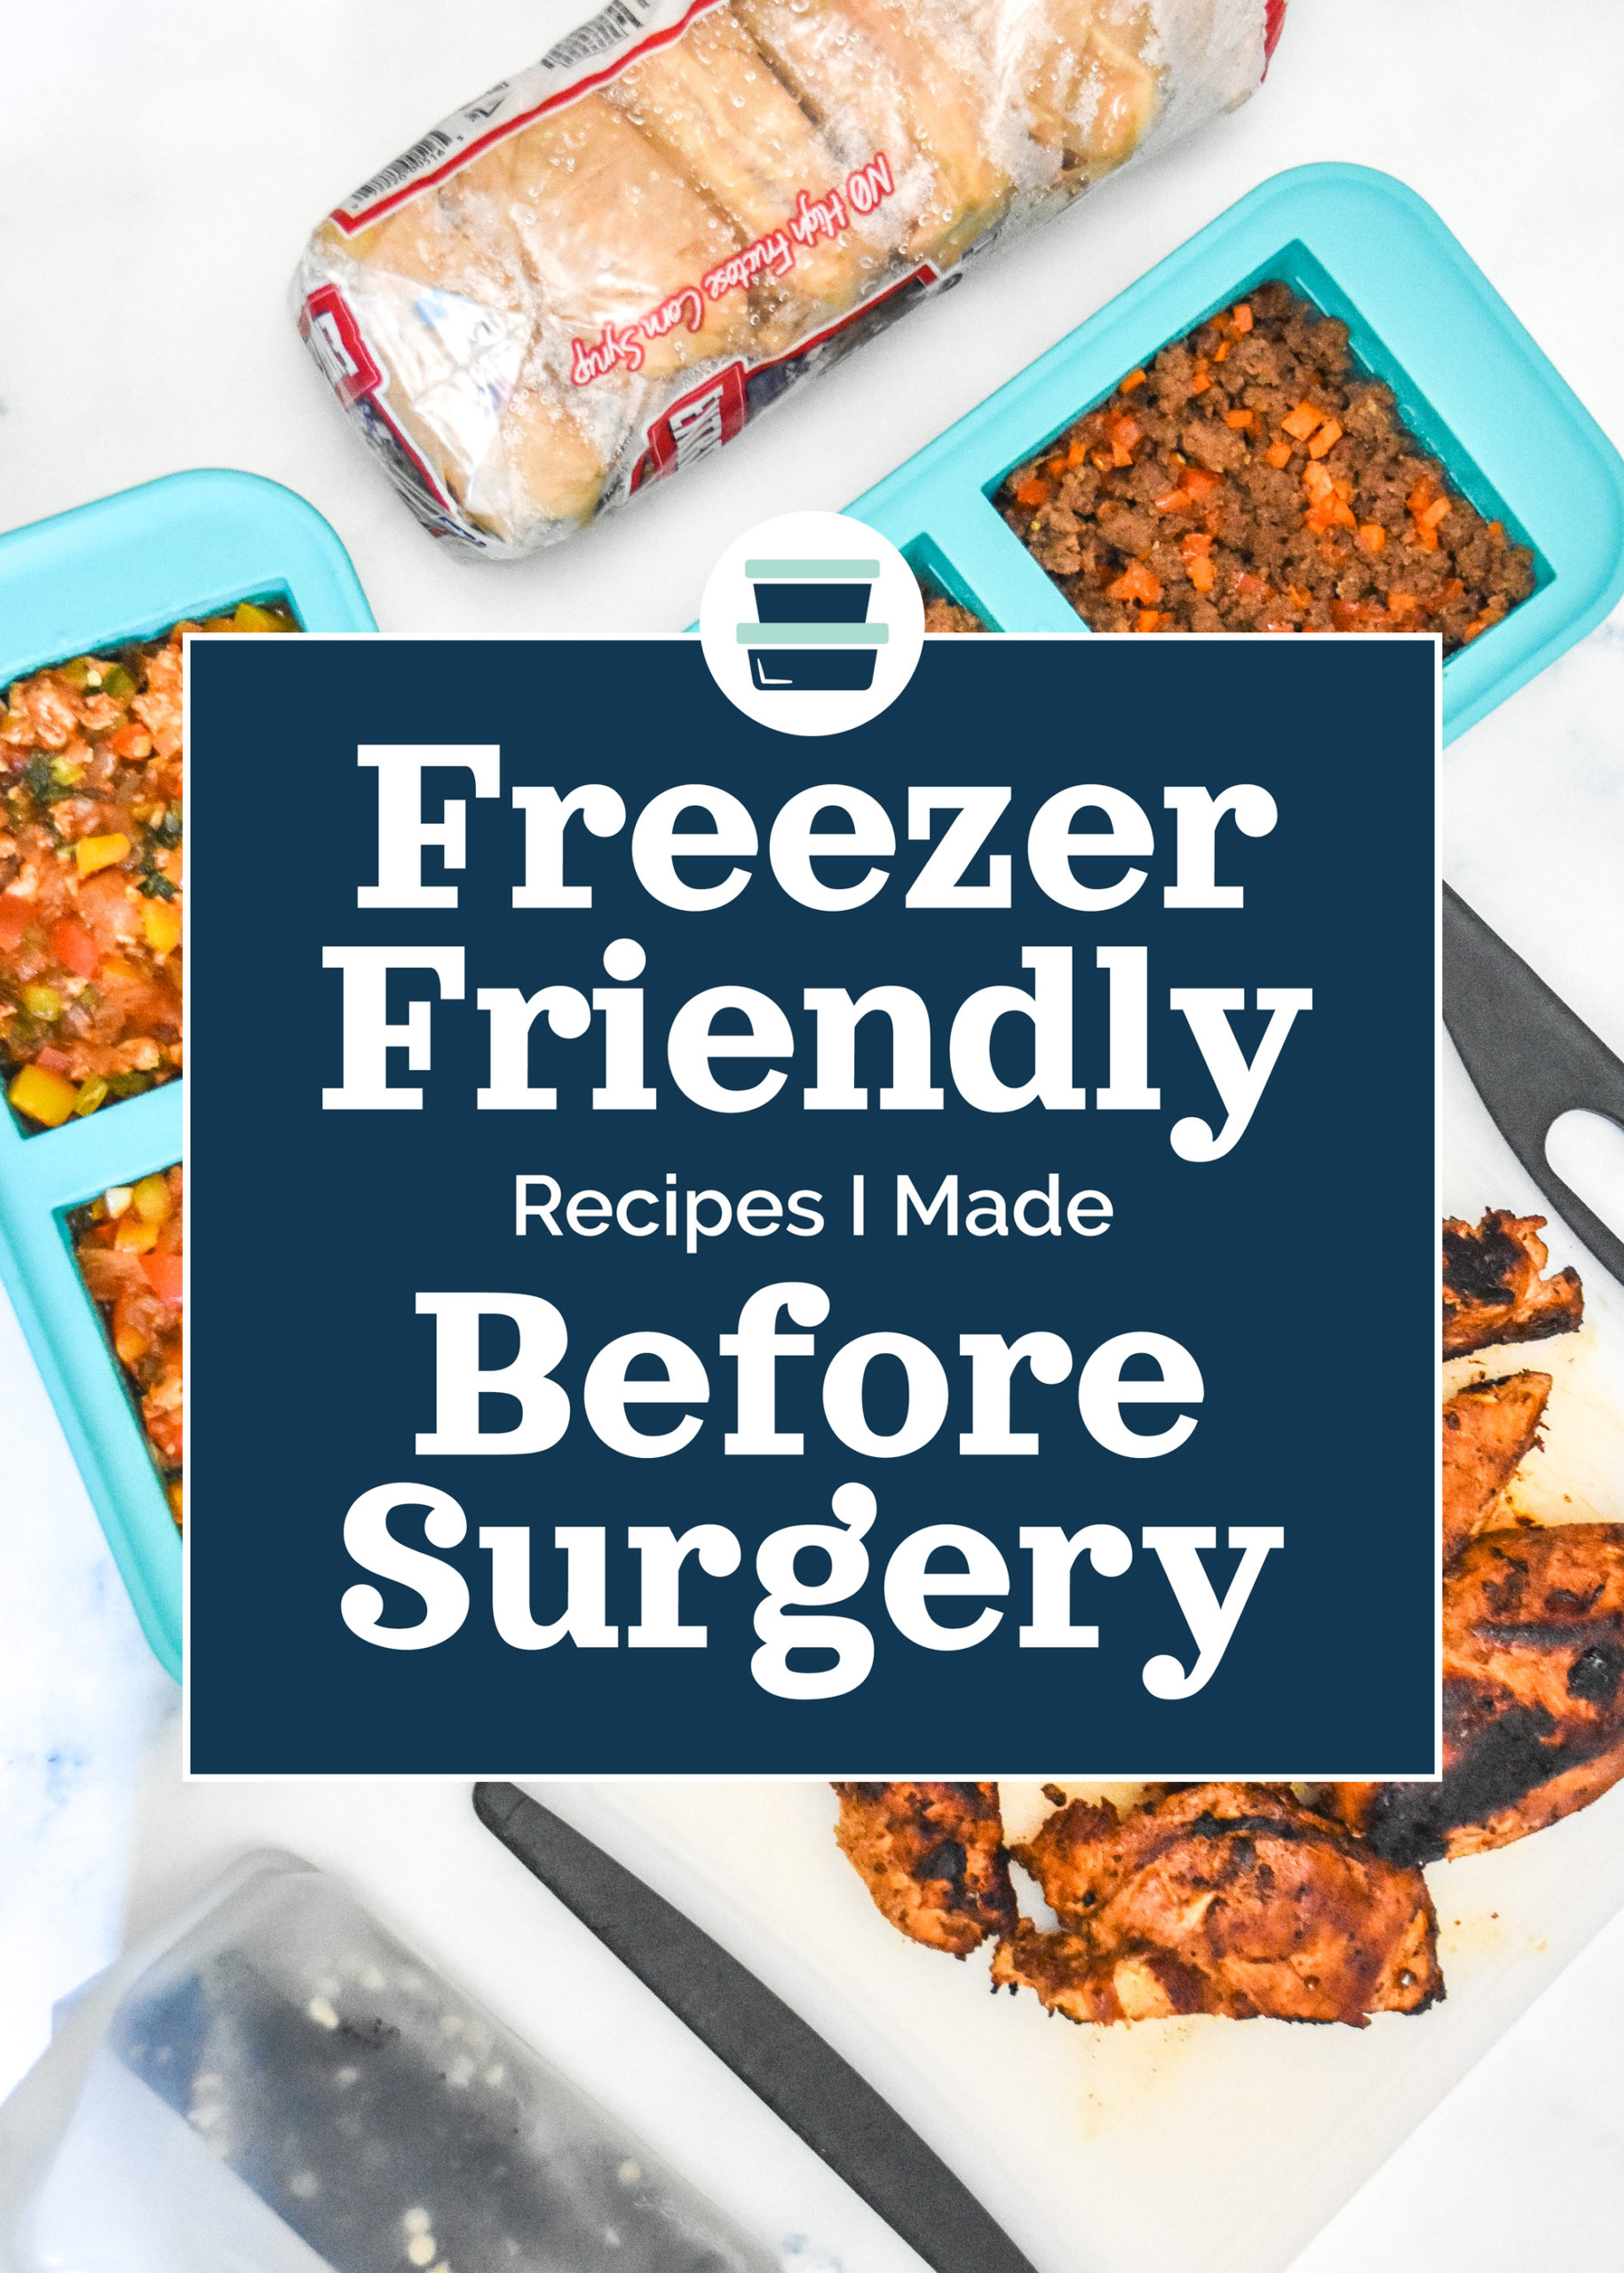 Fabulous freezer tips to help you save time & money